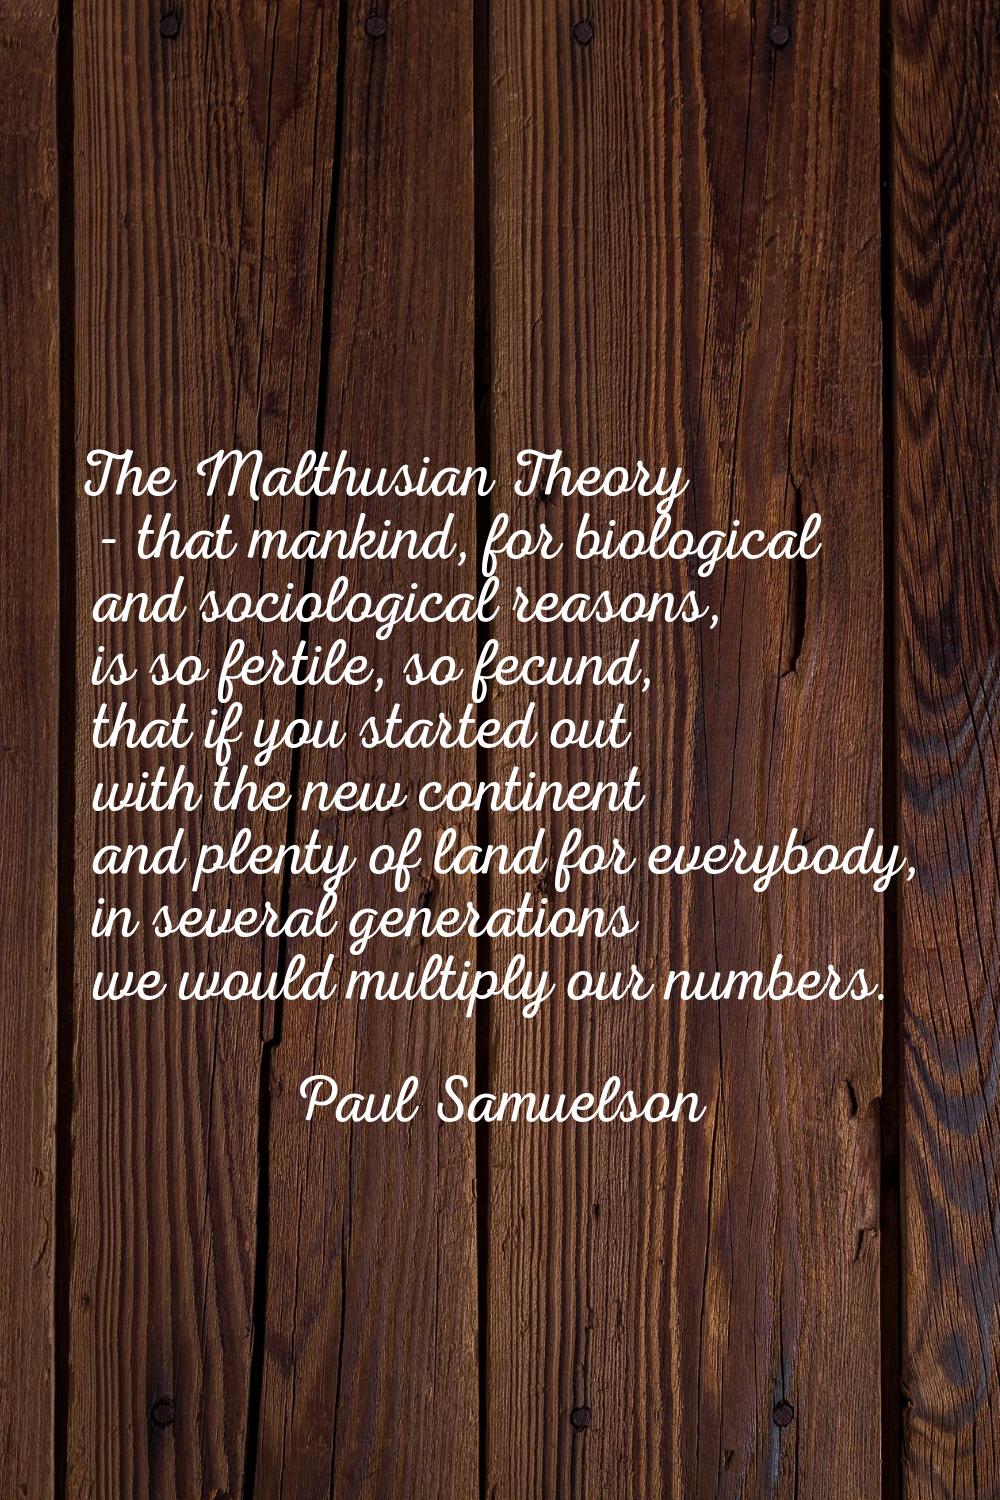 The Malthusian Theory - that mankind, for biological and sociological reasons, is so fertile, so fe